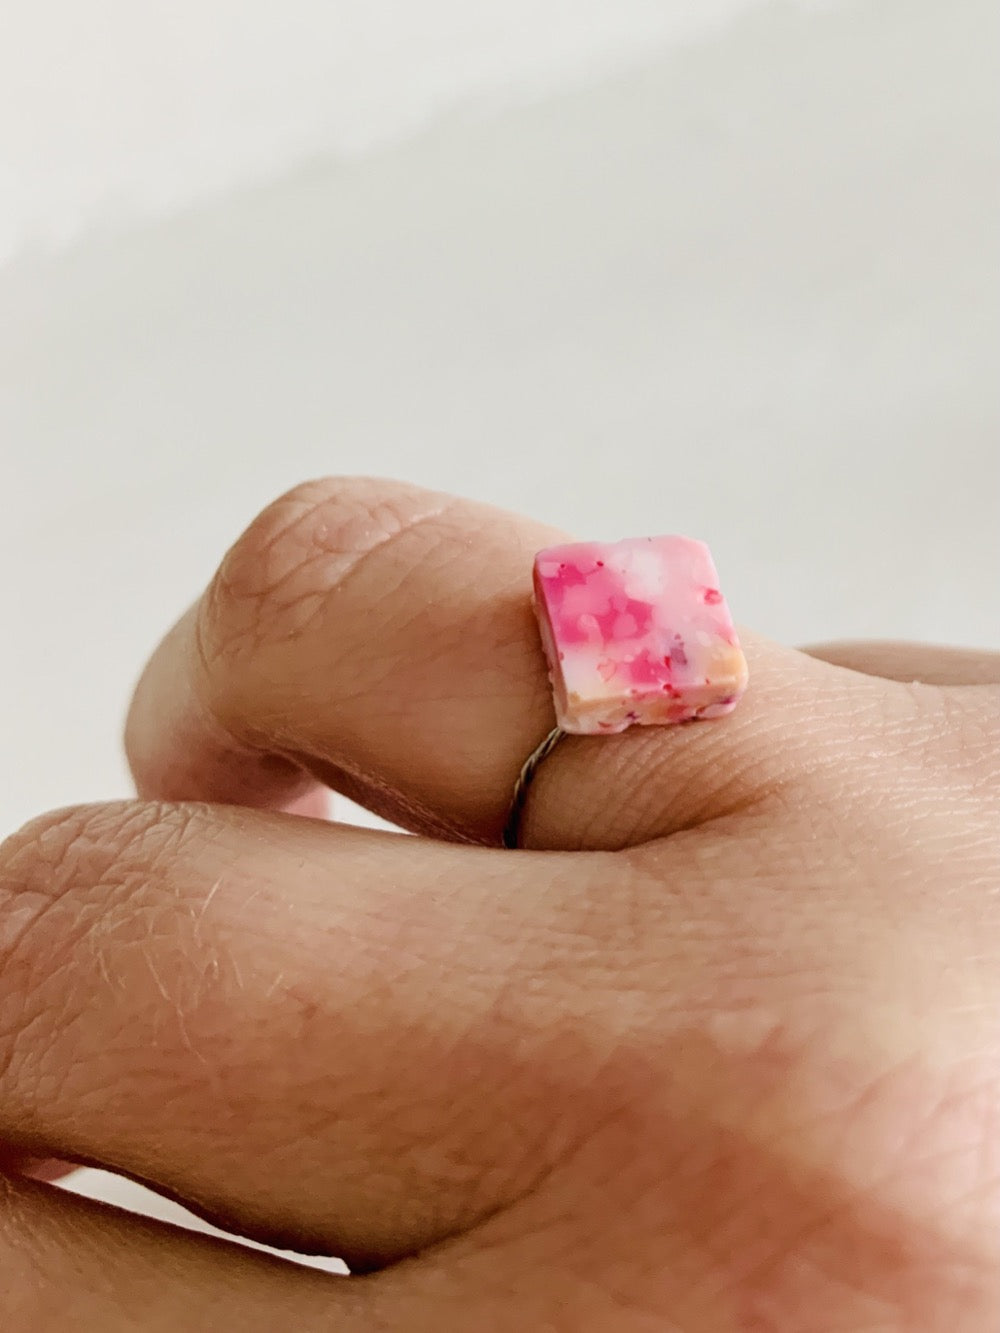 Shown on a person's ring finger and in front of a white background, there is a ring with a cast charm on a thin twisted band. The charm is cast from recycled 3D prints in shades of pinks, yellow, orange, and white. It has the look of granite or marble. 